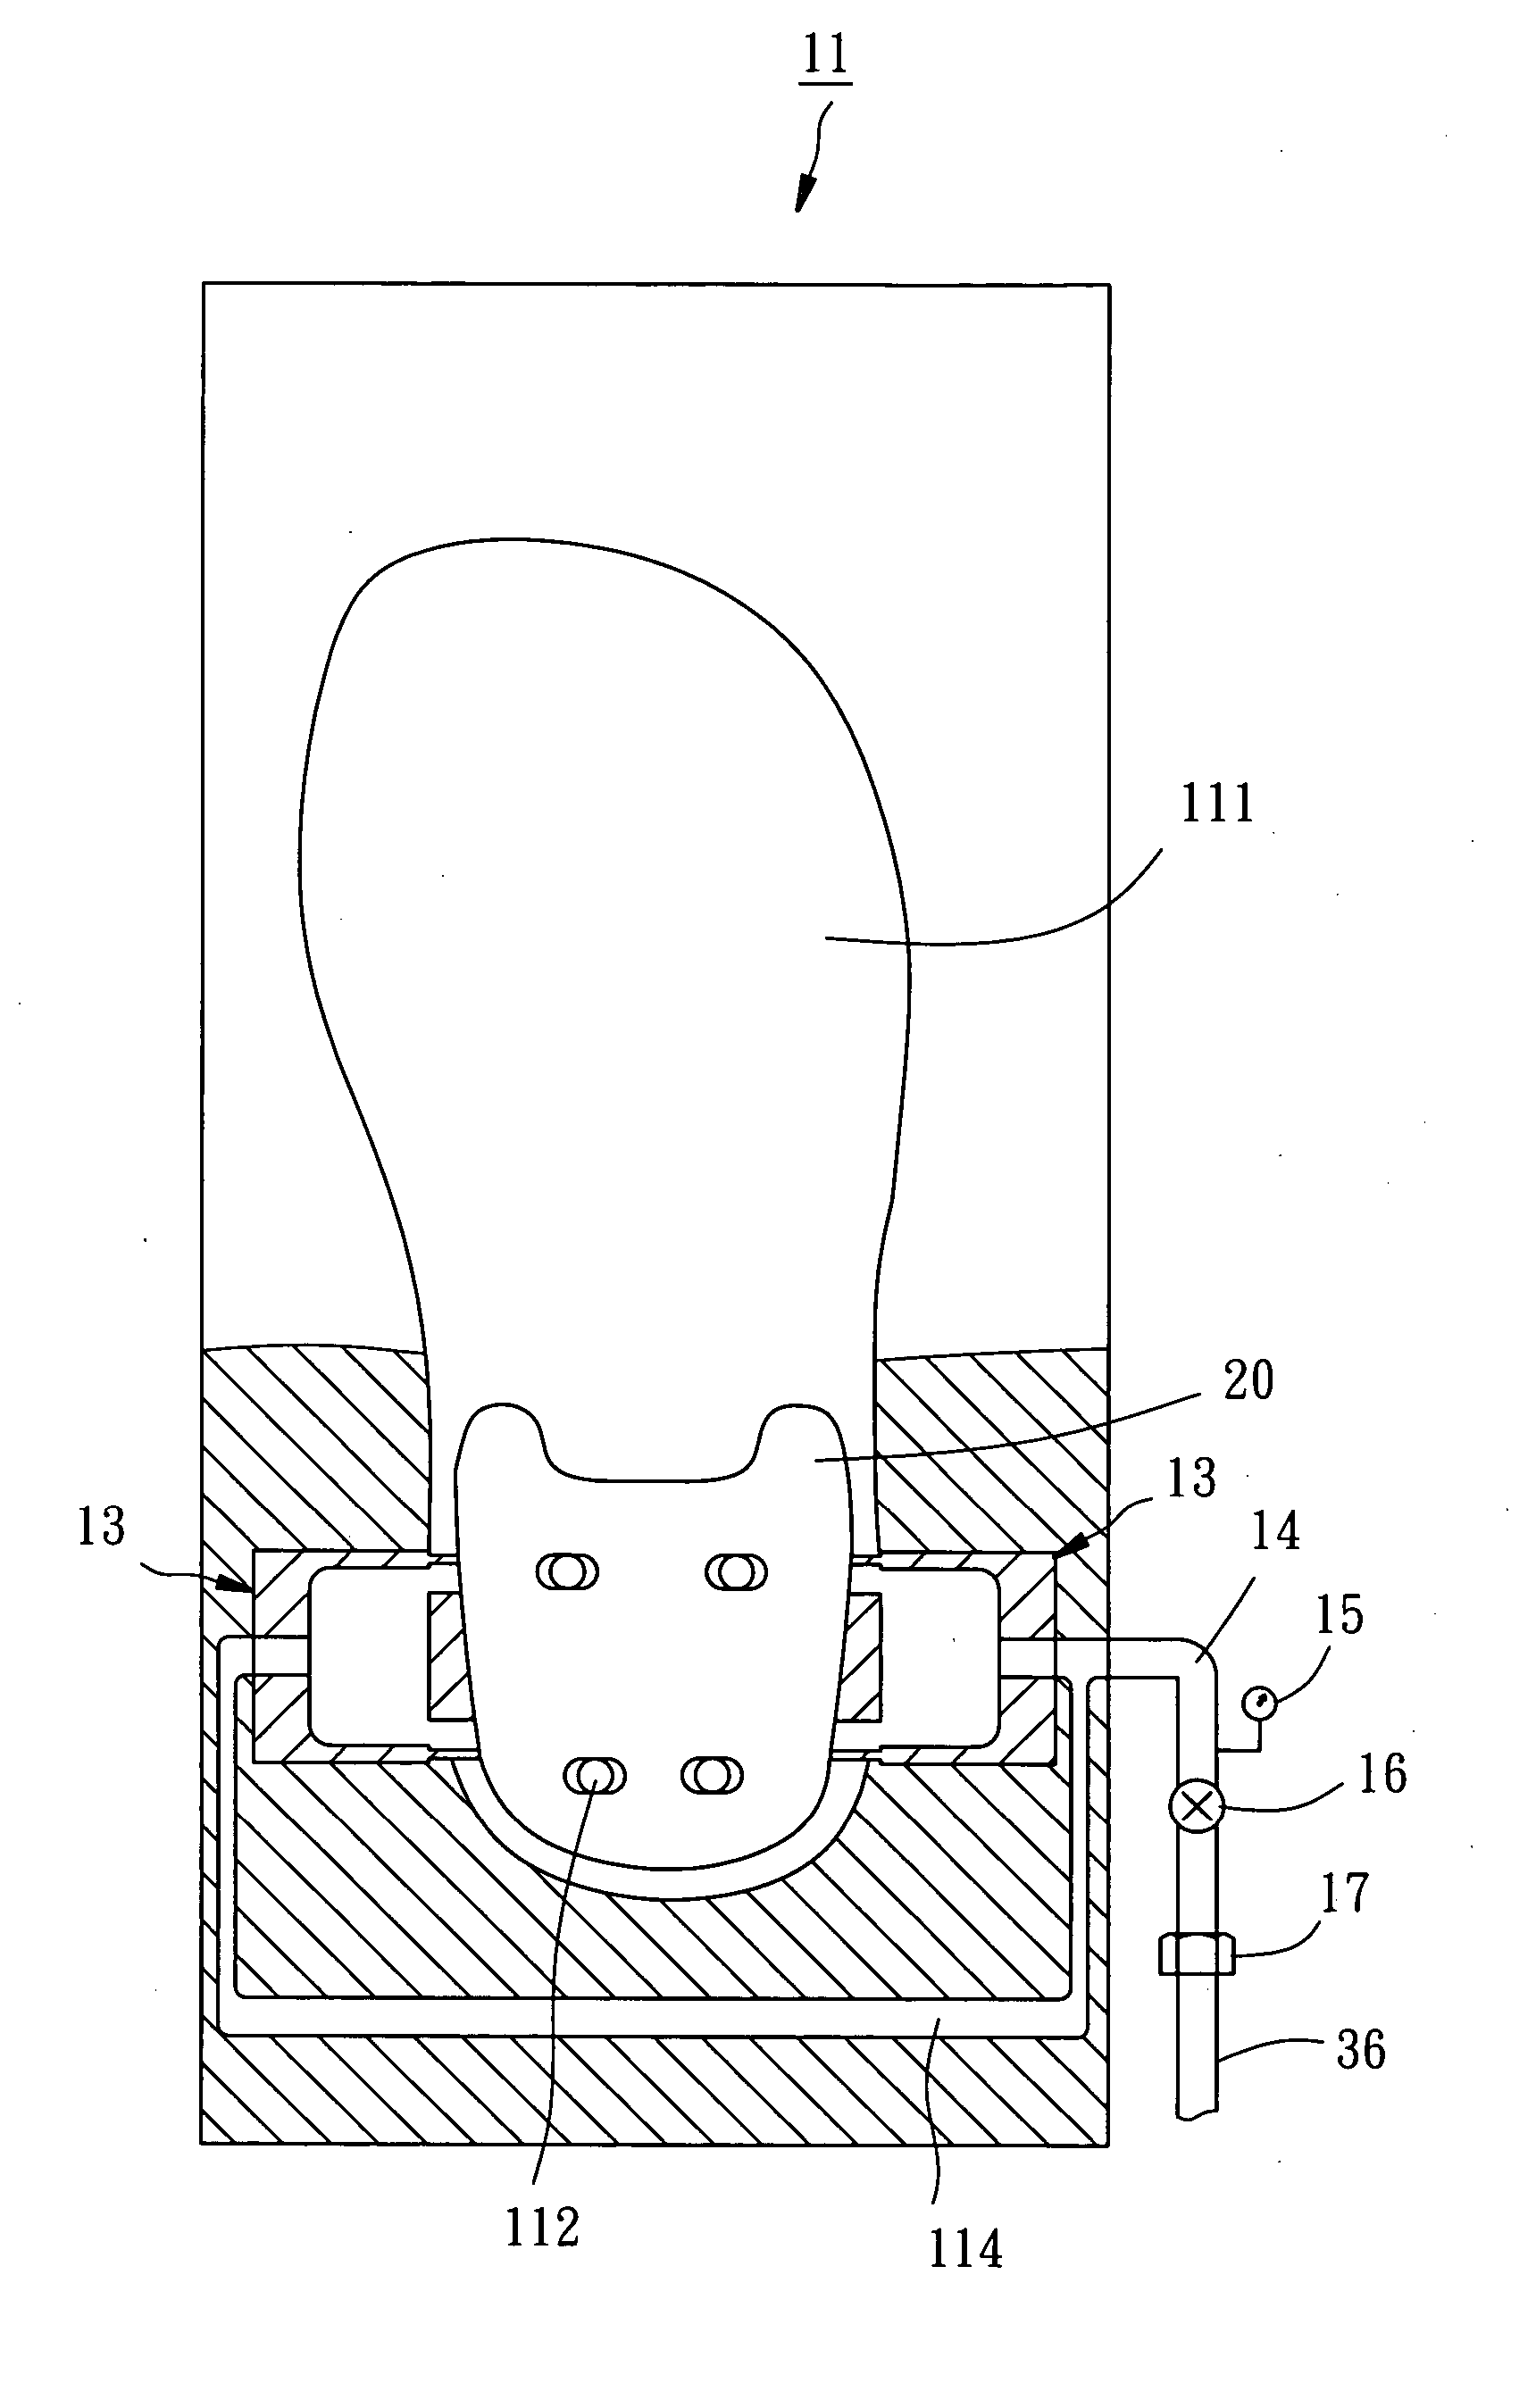 Method of making outsole